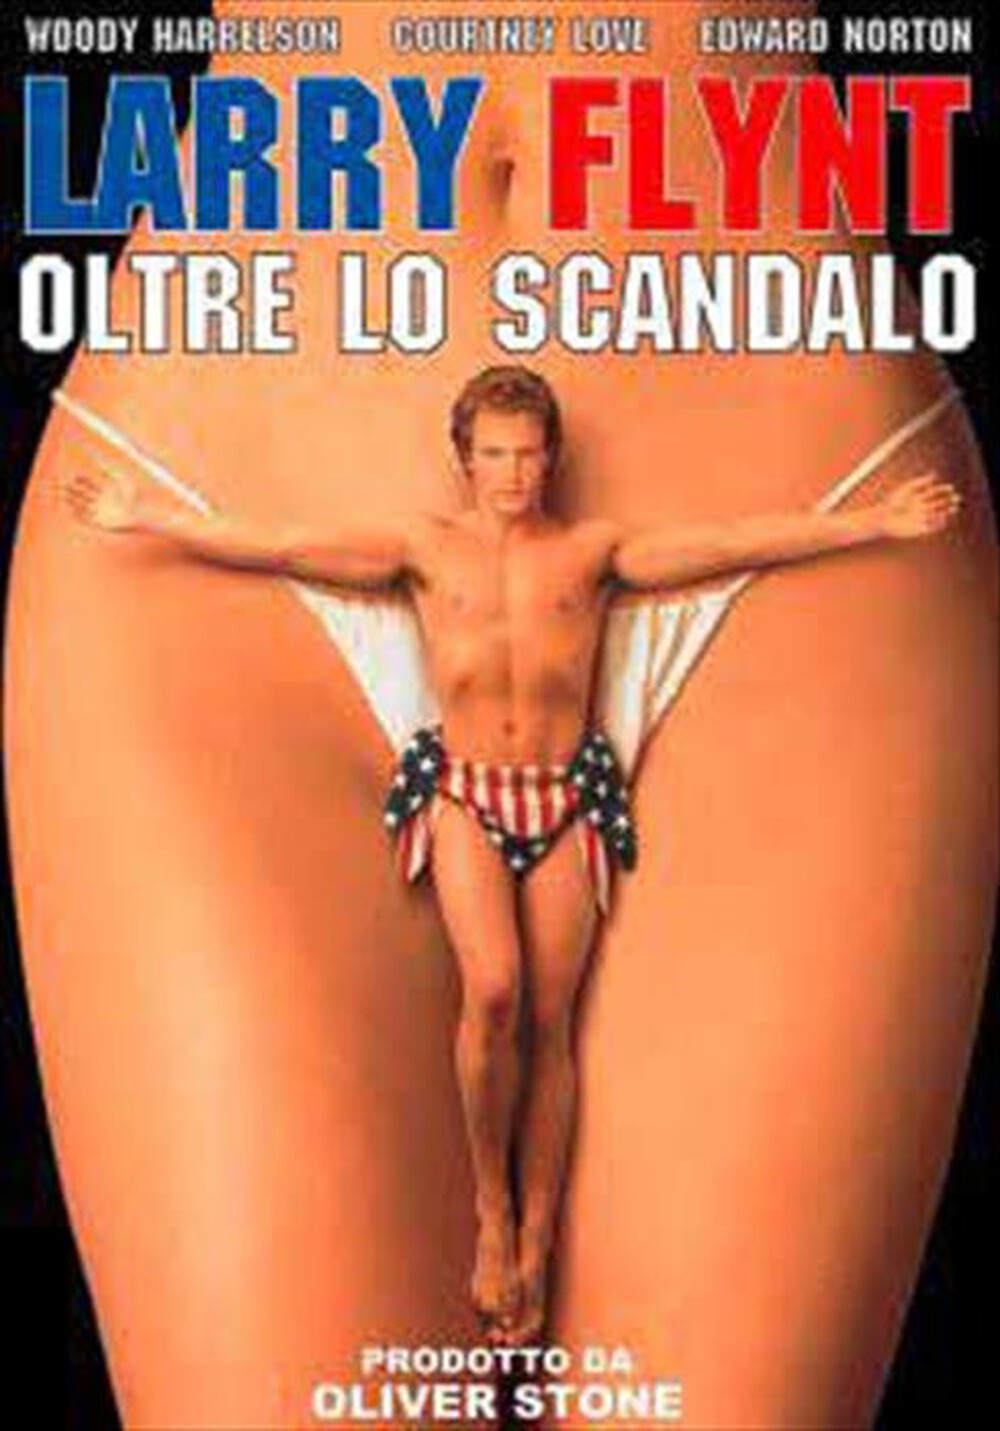 "SONY PICTURES - Larry Flynt - Oltre Lo Scandalo"